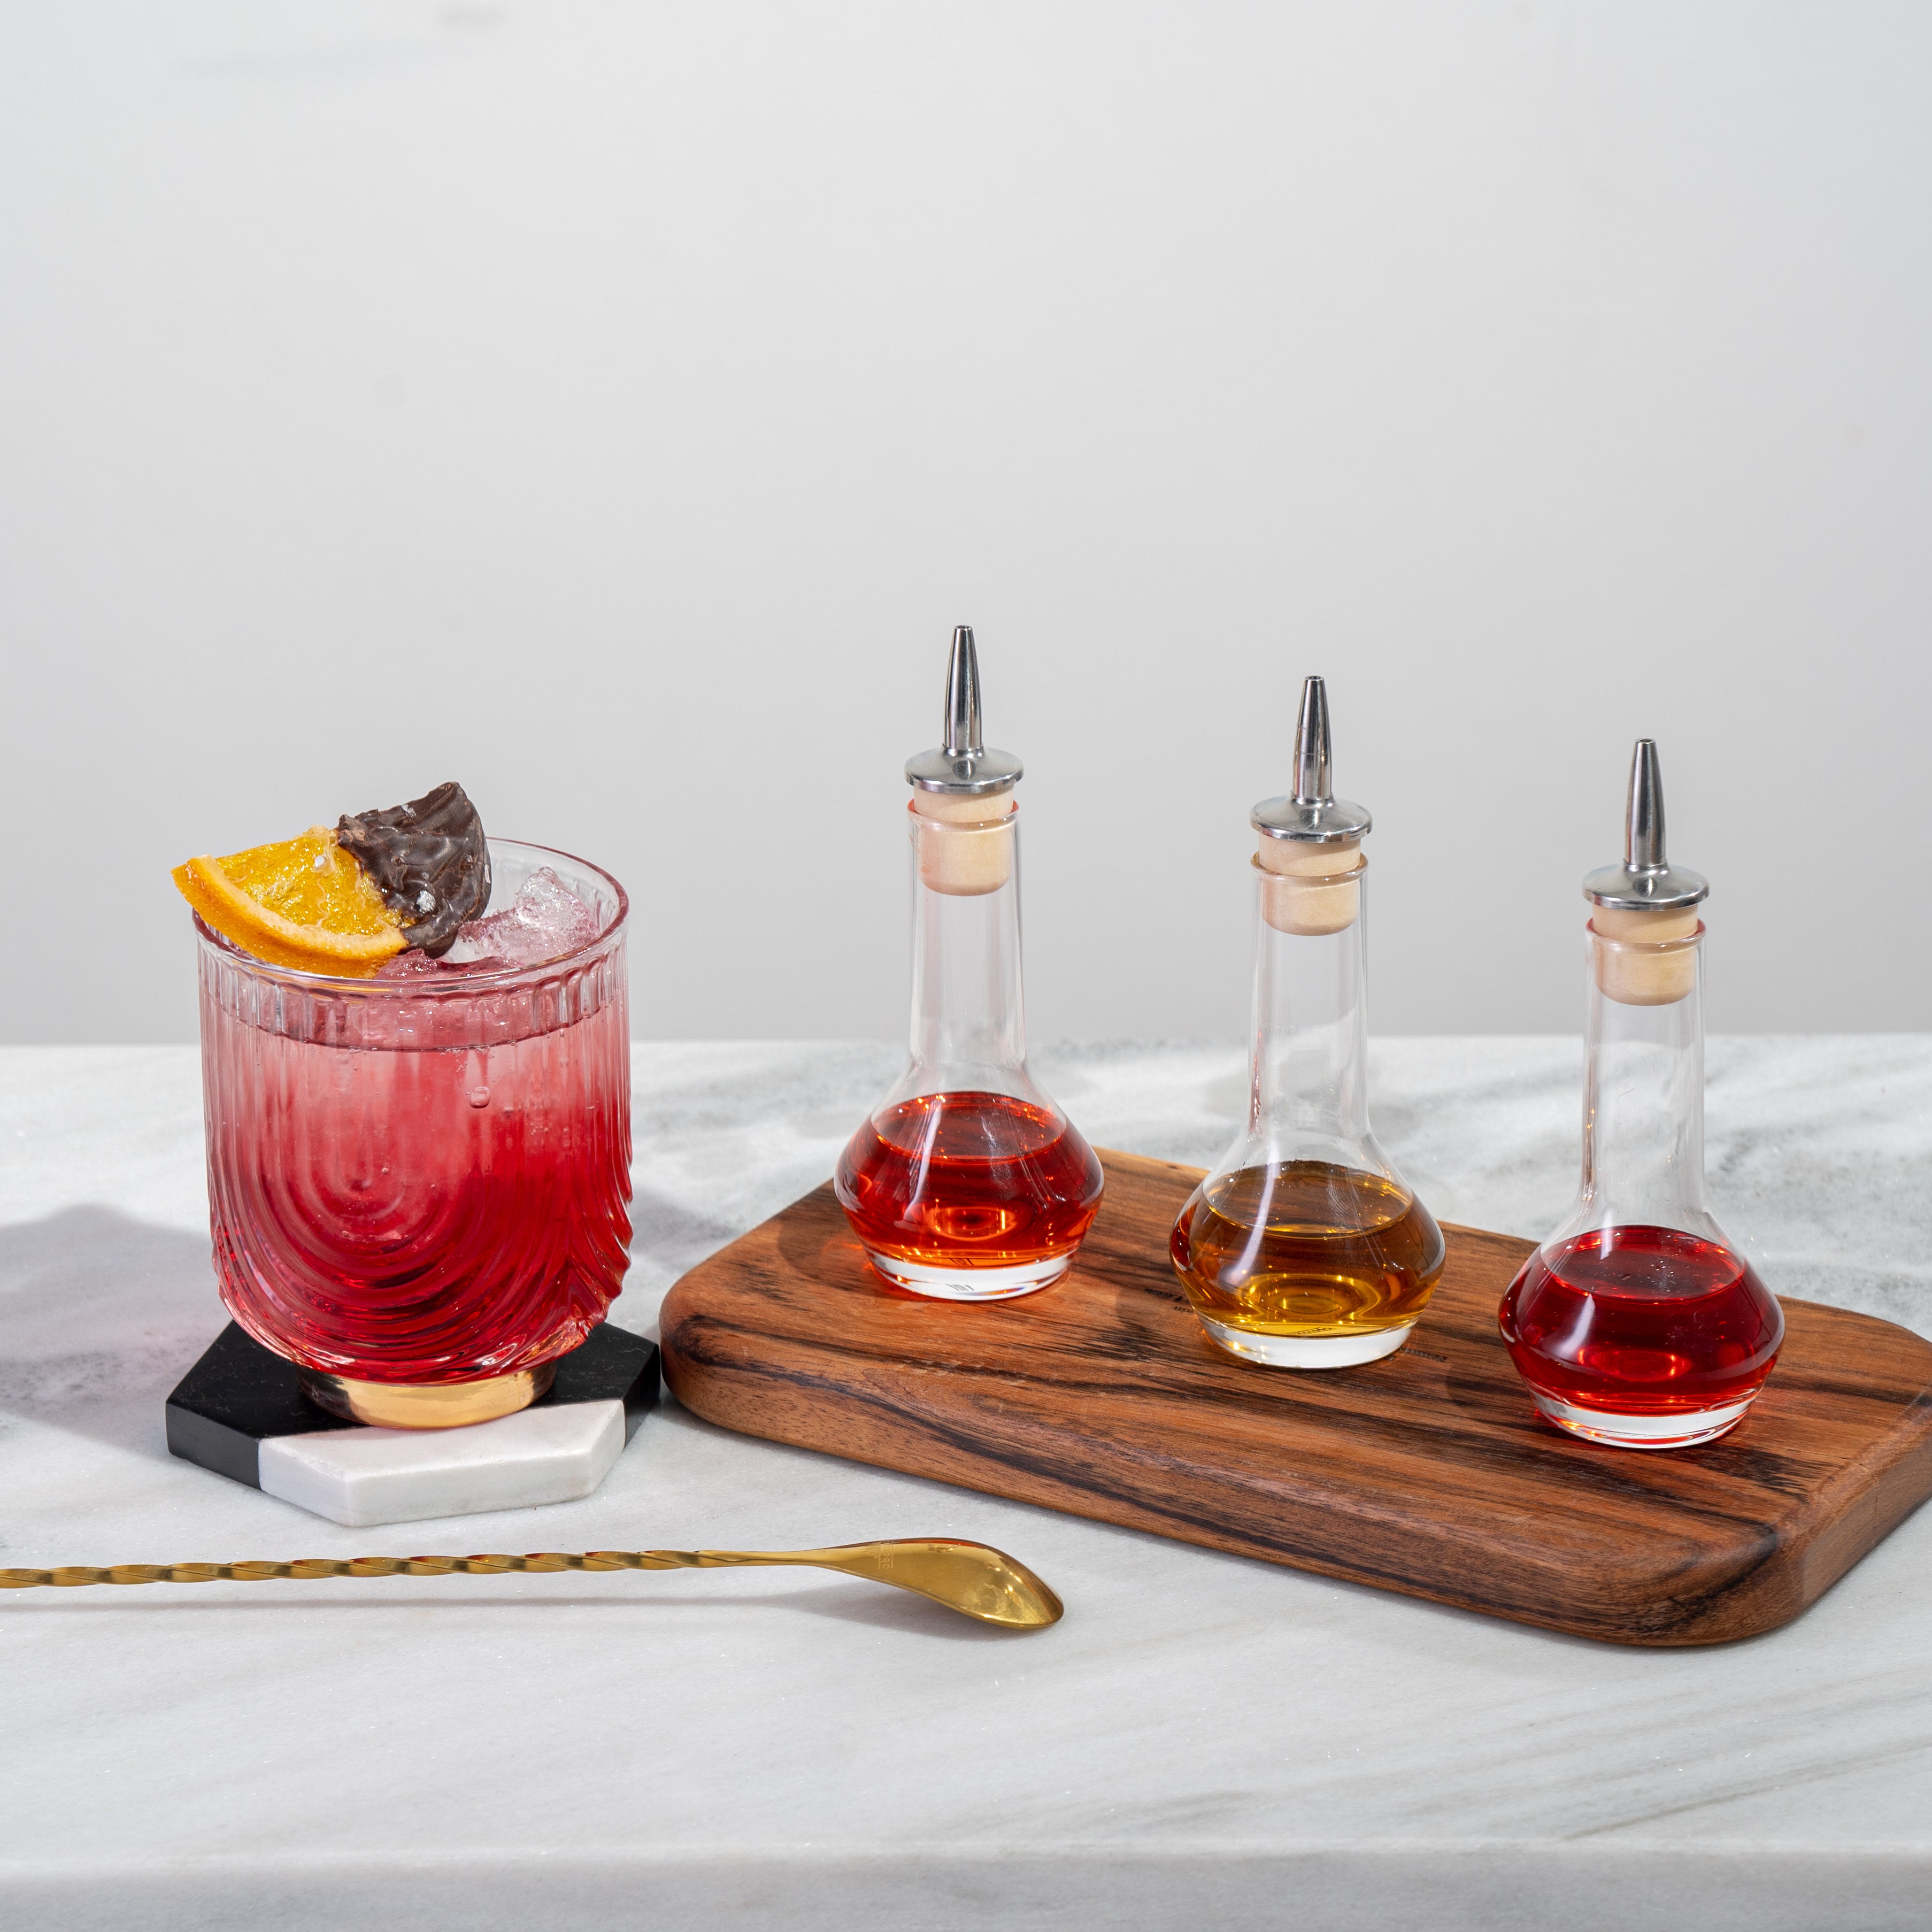 Red cocktail with candied orange garnish sitting next to 3 clear bitters bottles with red and amber liquid, next to a gold bar spoon 